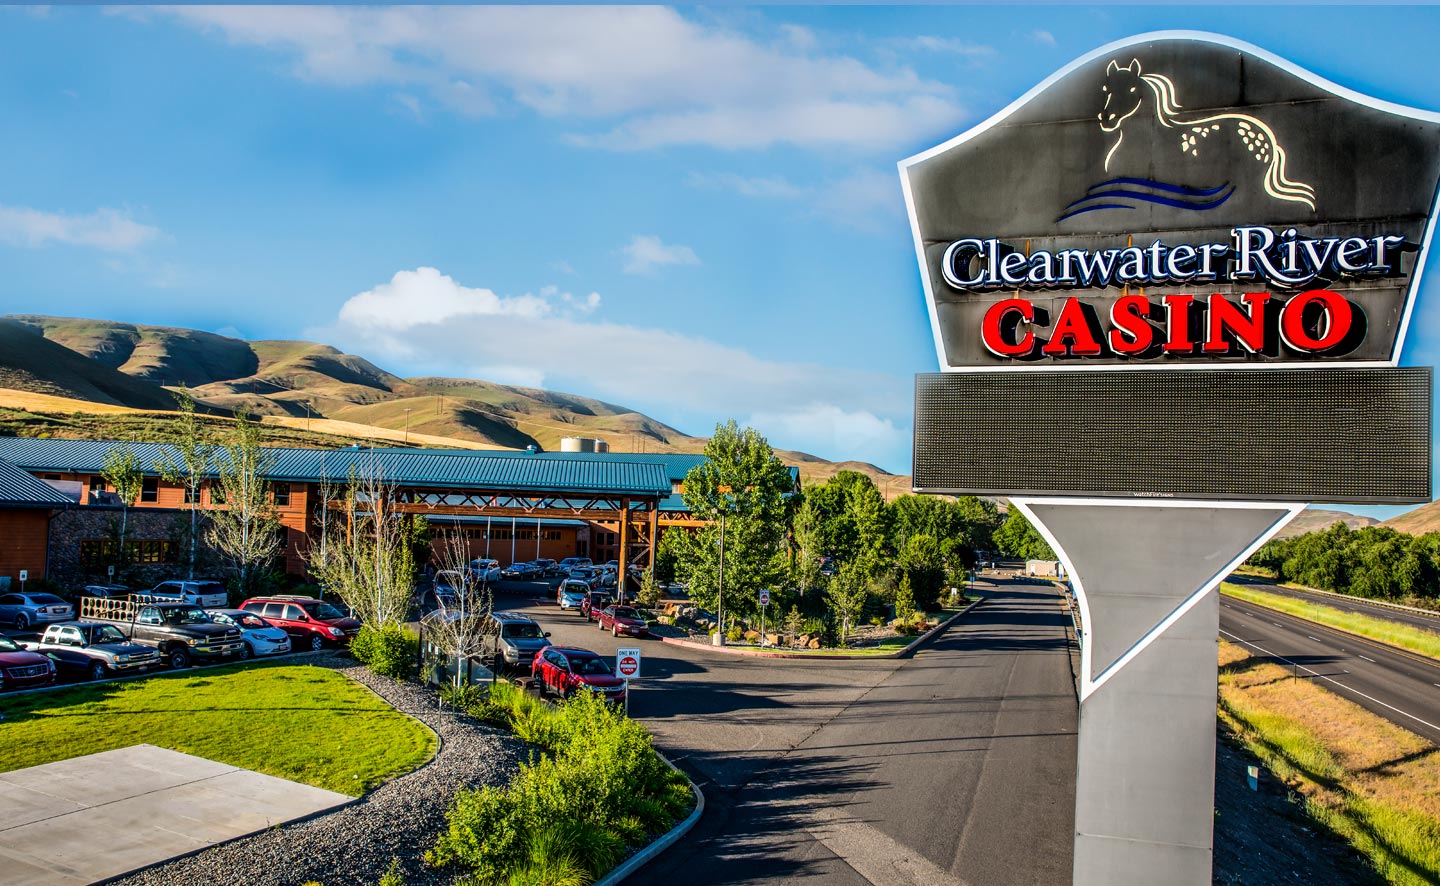 Idaho’s Clearwater River Casino Player Wins Record .5M